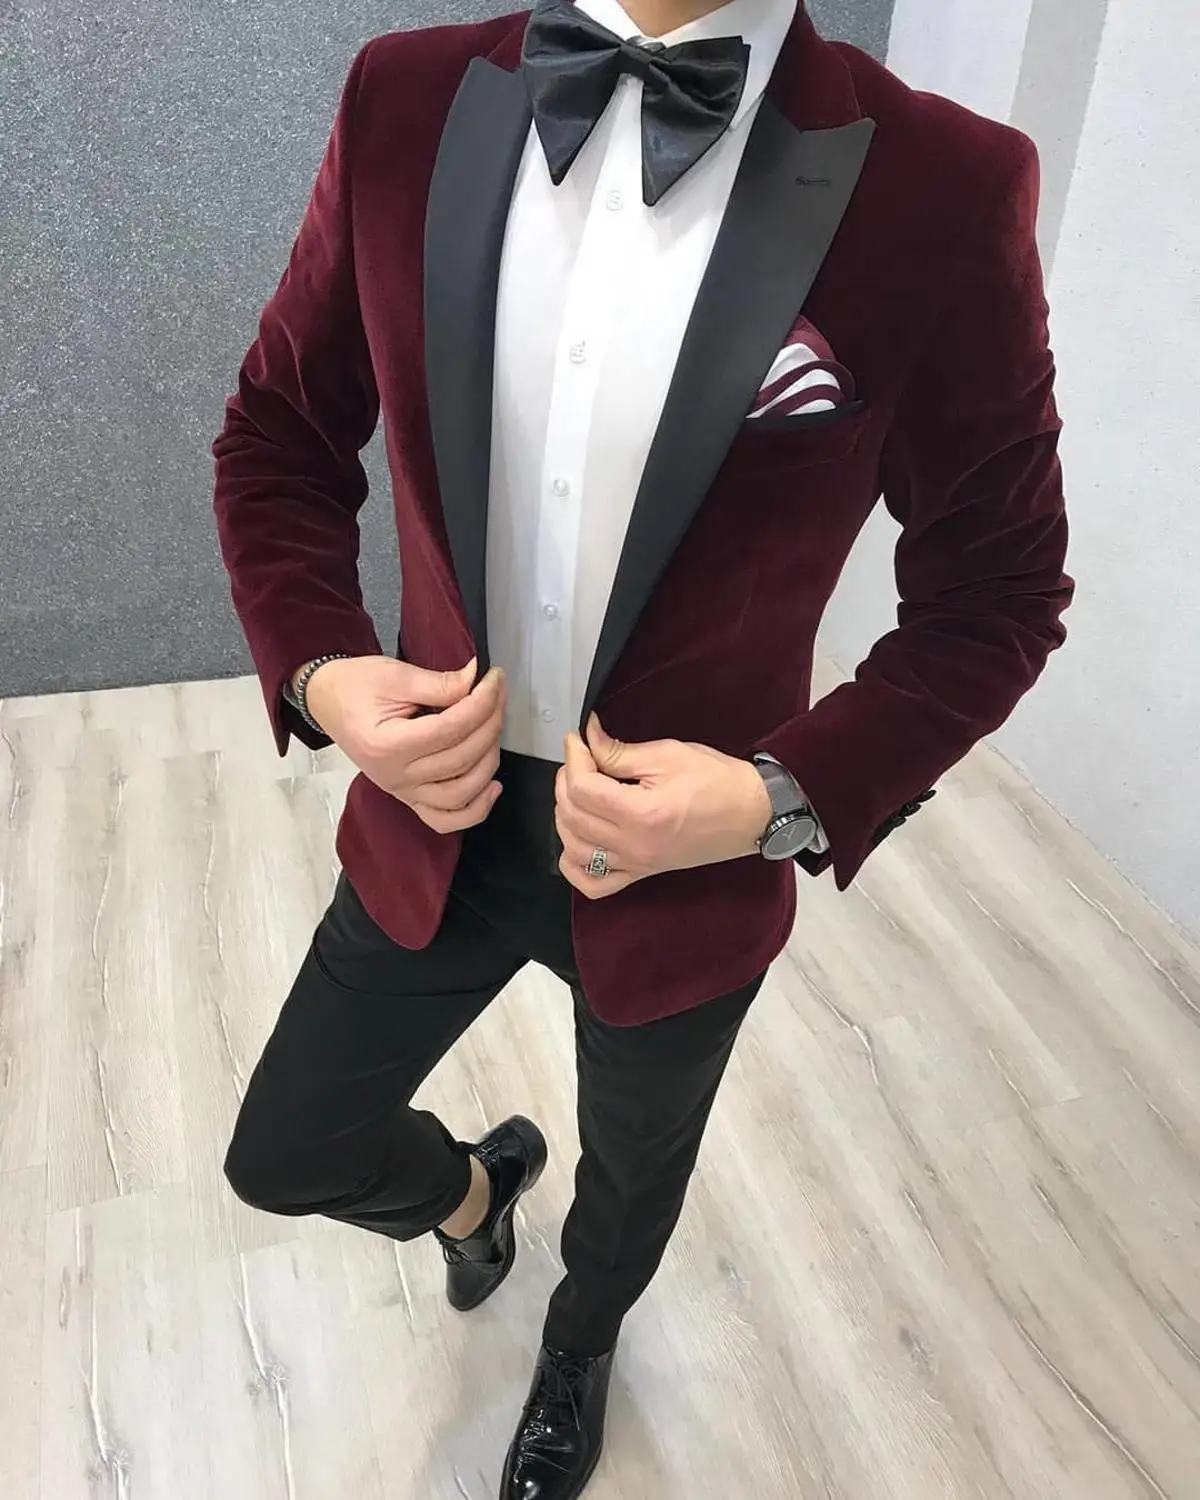 

Solovedress Velvet Blazer Jacket Peak Lapel Button Fly Mens Prom Suit Two Three Pieces Soft High Quality Fashion Tuxedos Wear